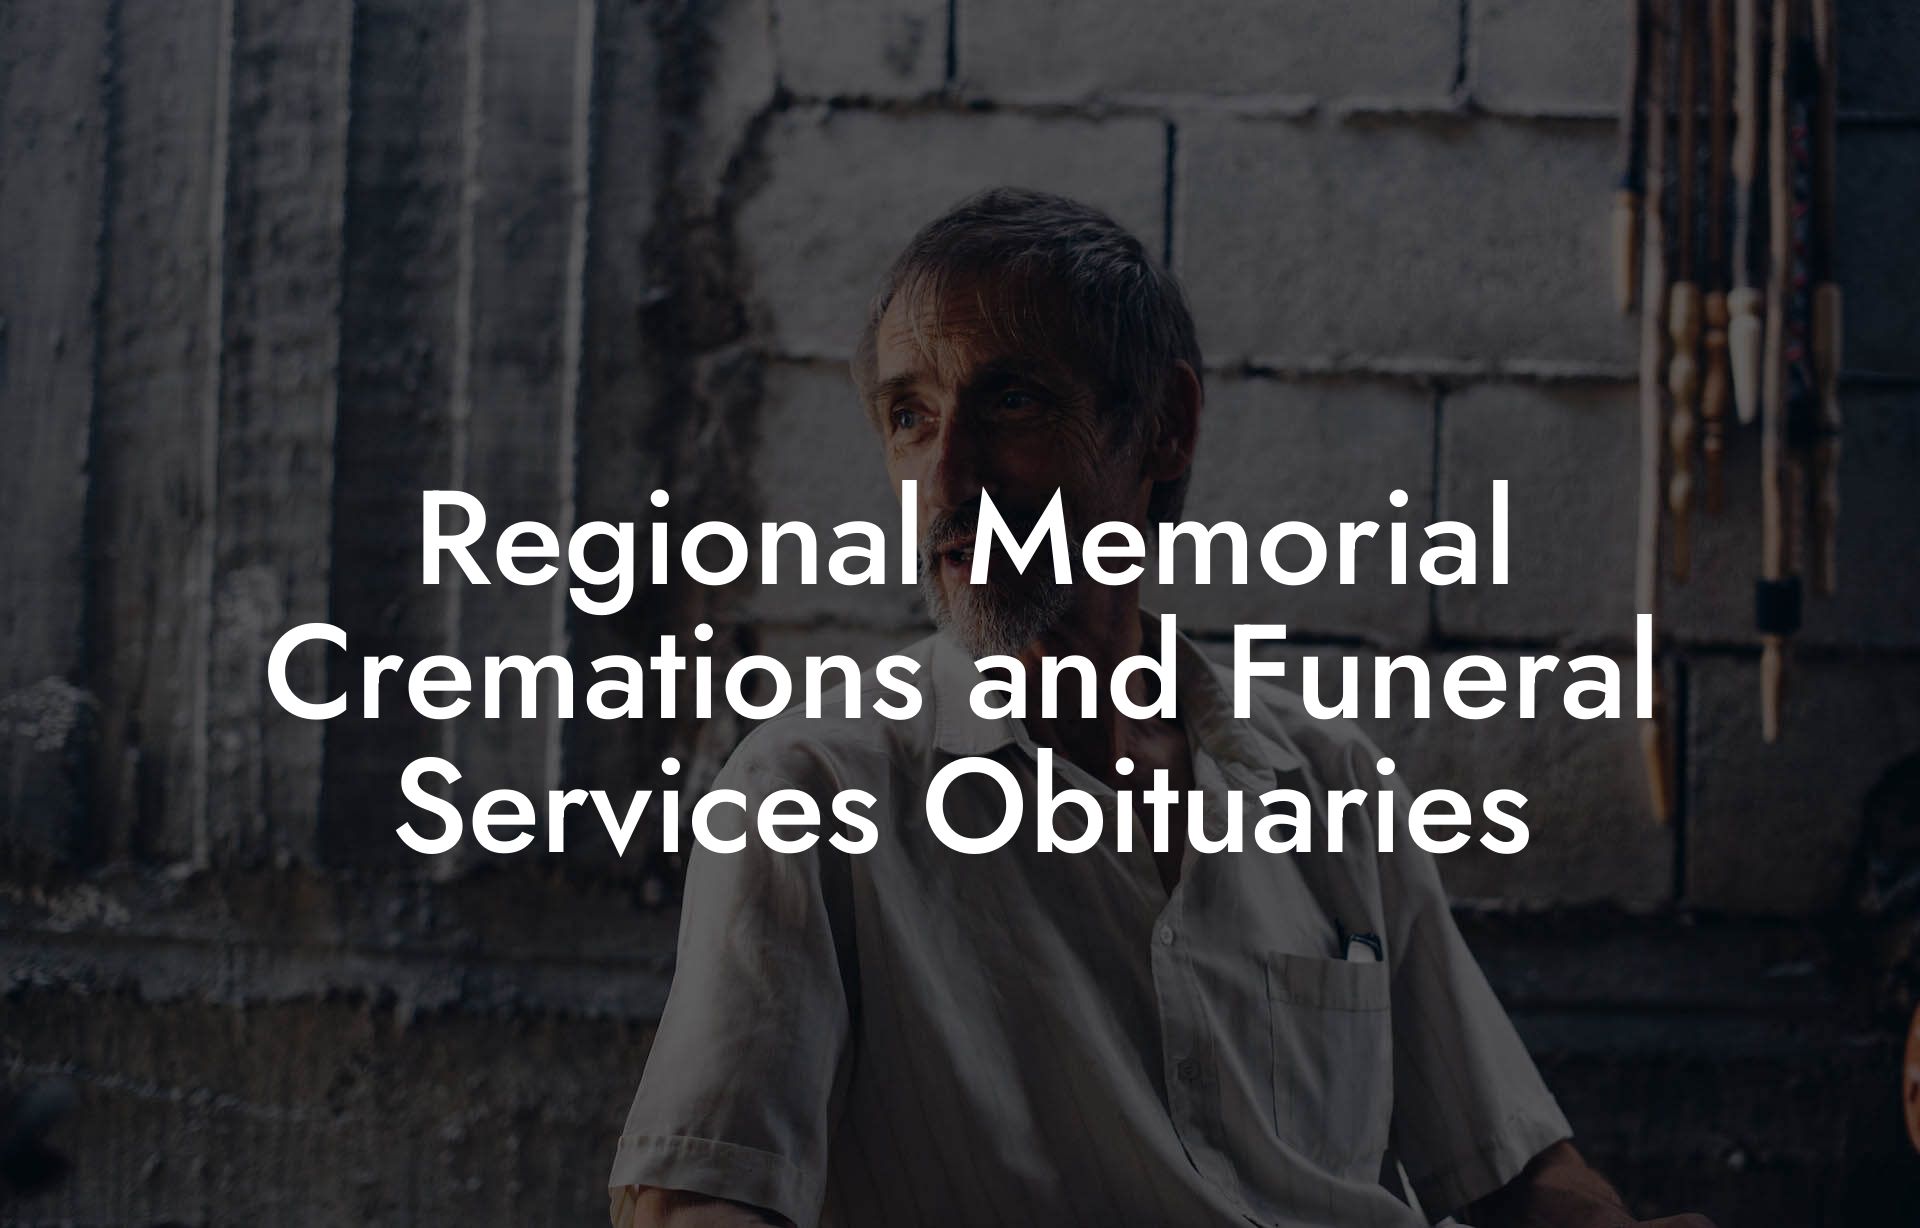 Regional Memorial Cremations and Funeral Services Obituaries